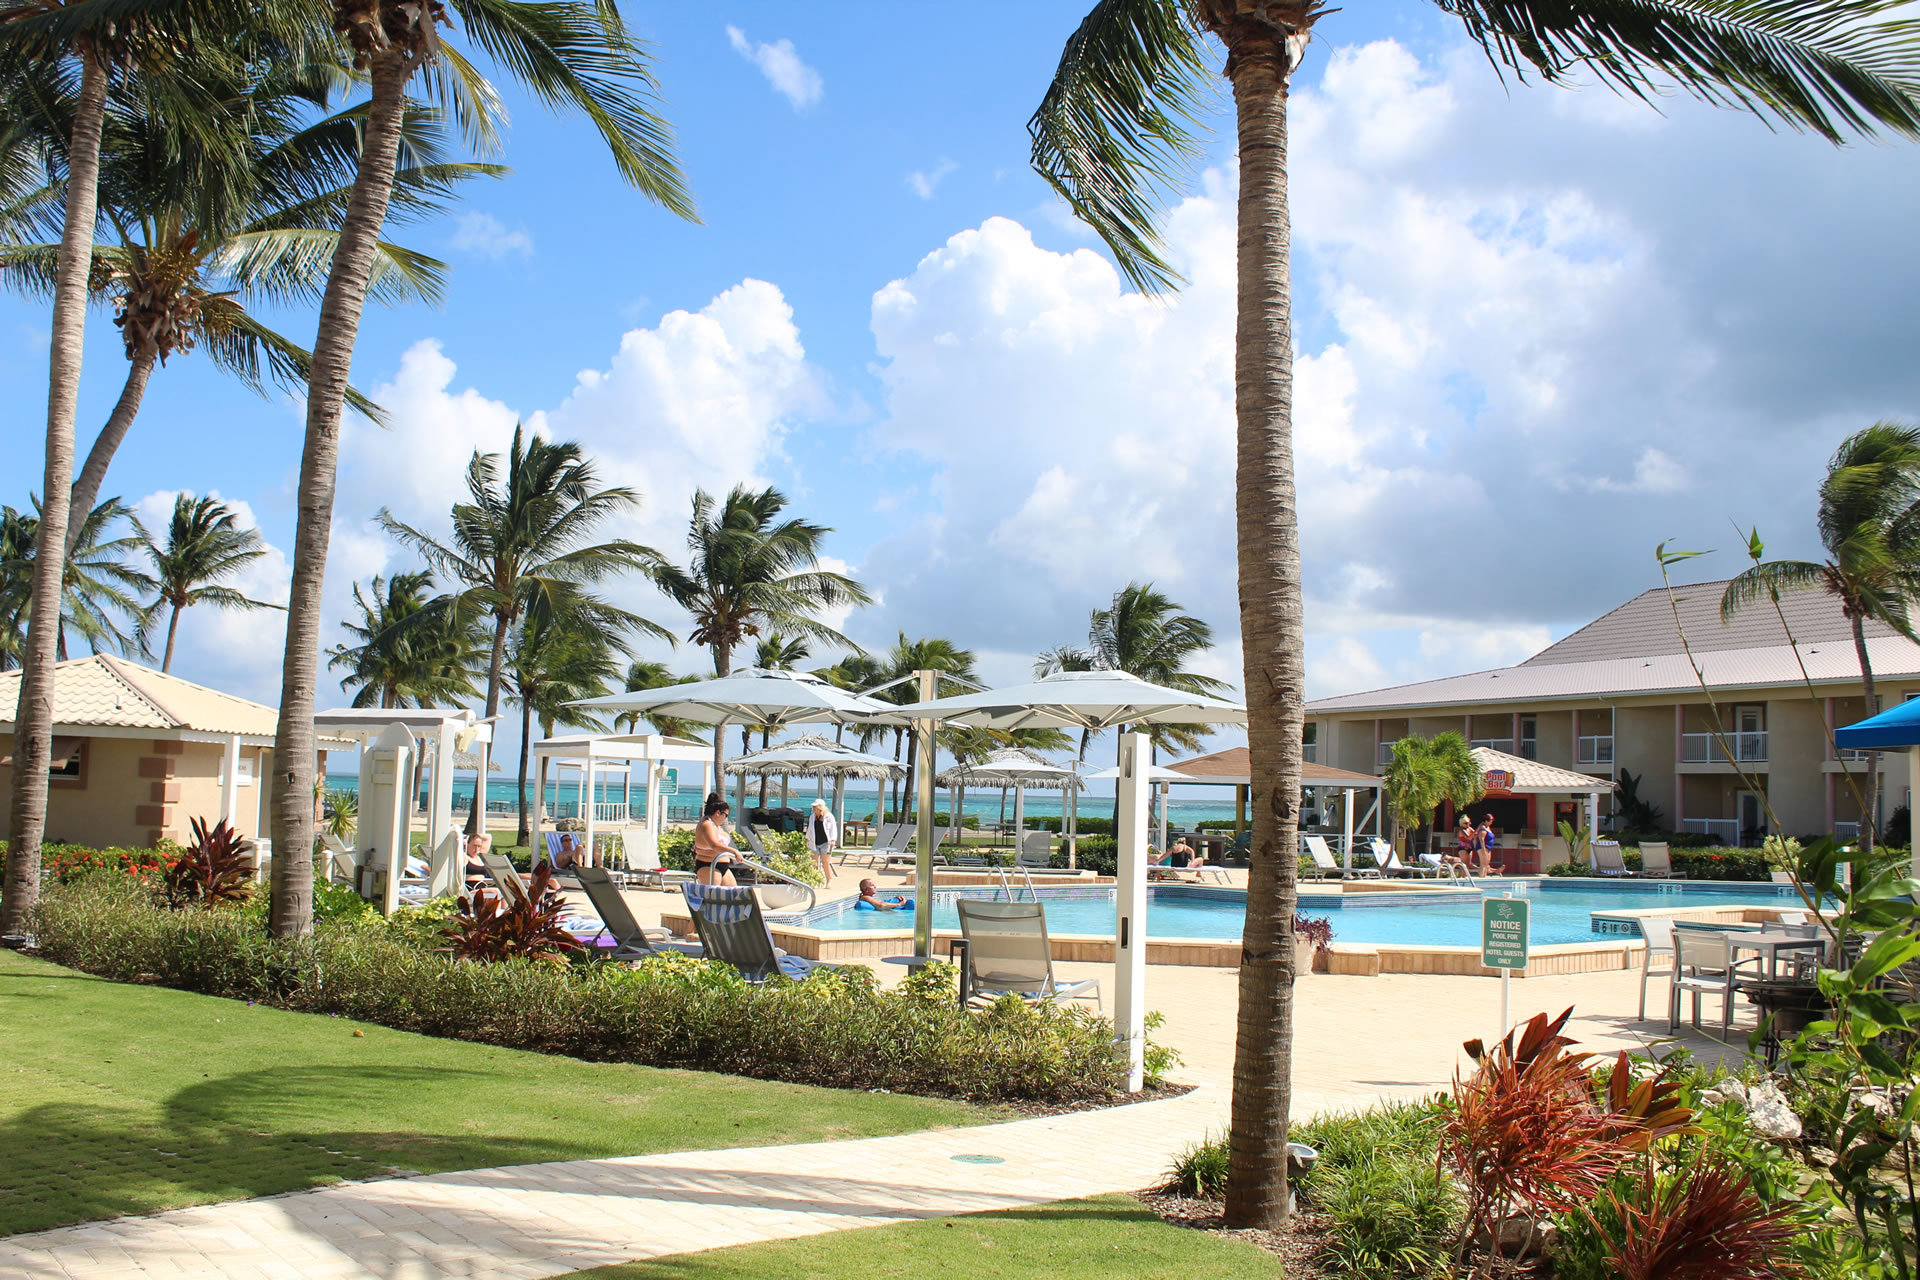 Pool area at the Grand Caymanian Resort.